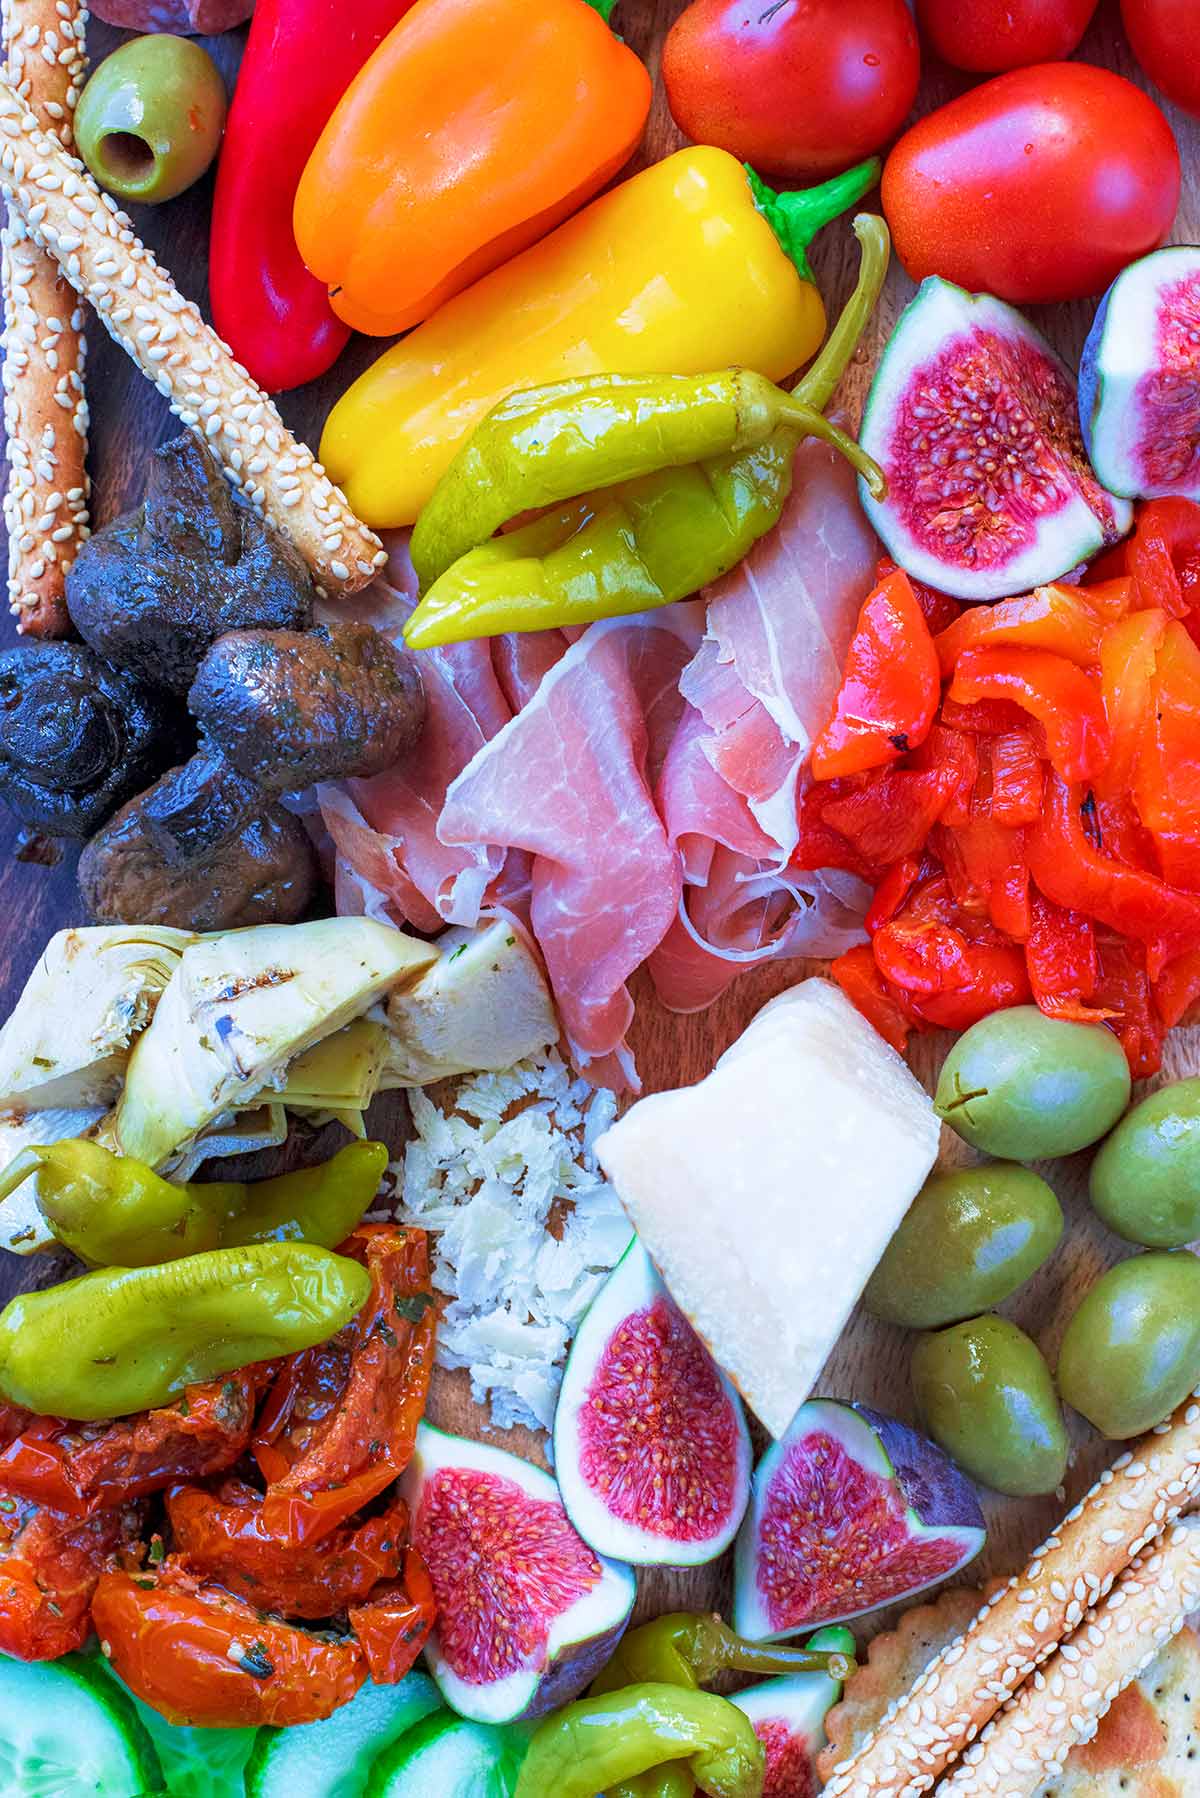 Meats, bread, olives, figs, cheese peppers and mushrooms on a wooden board.